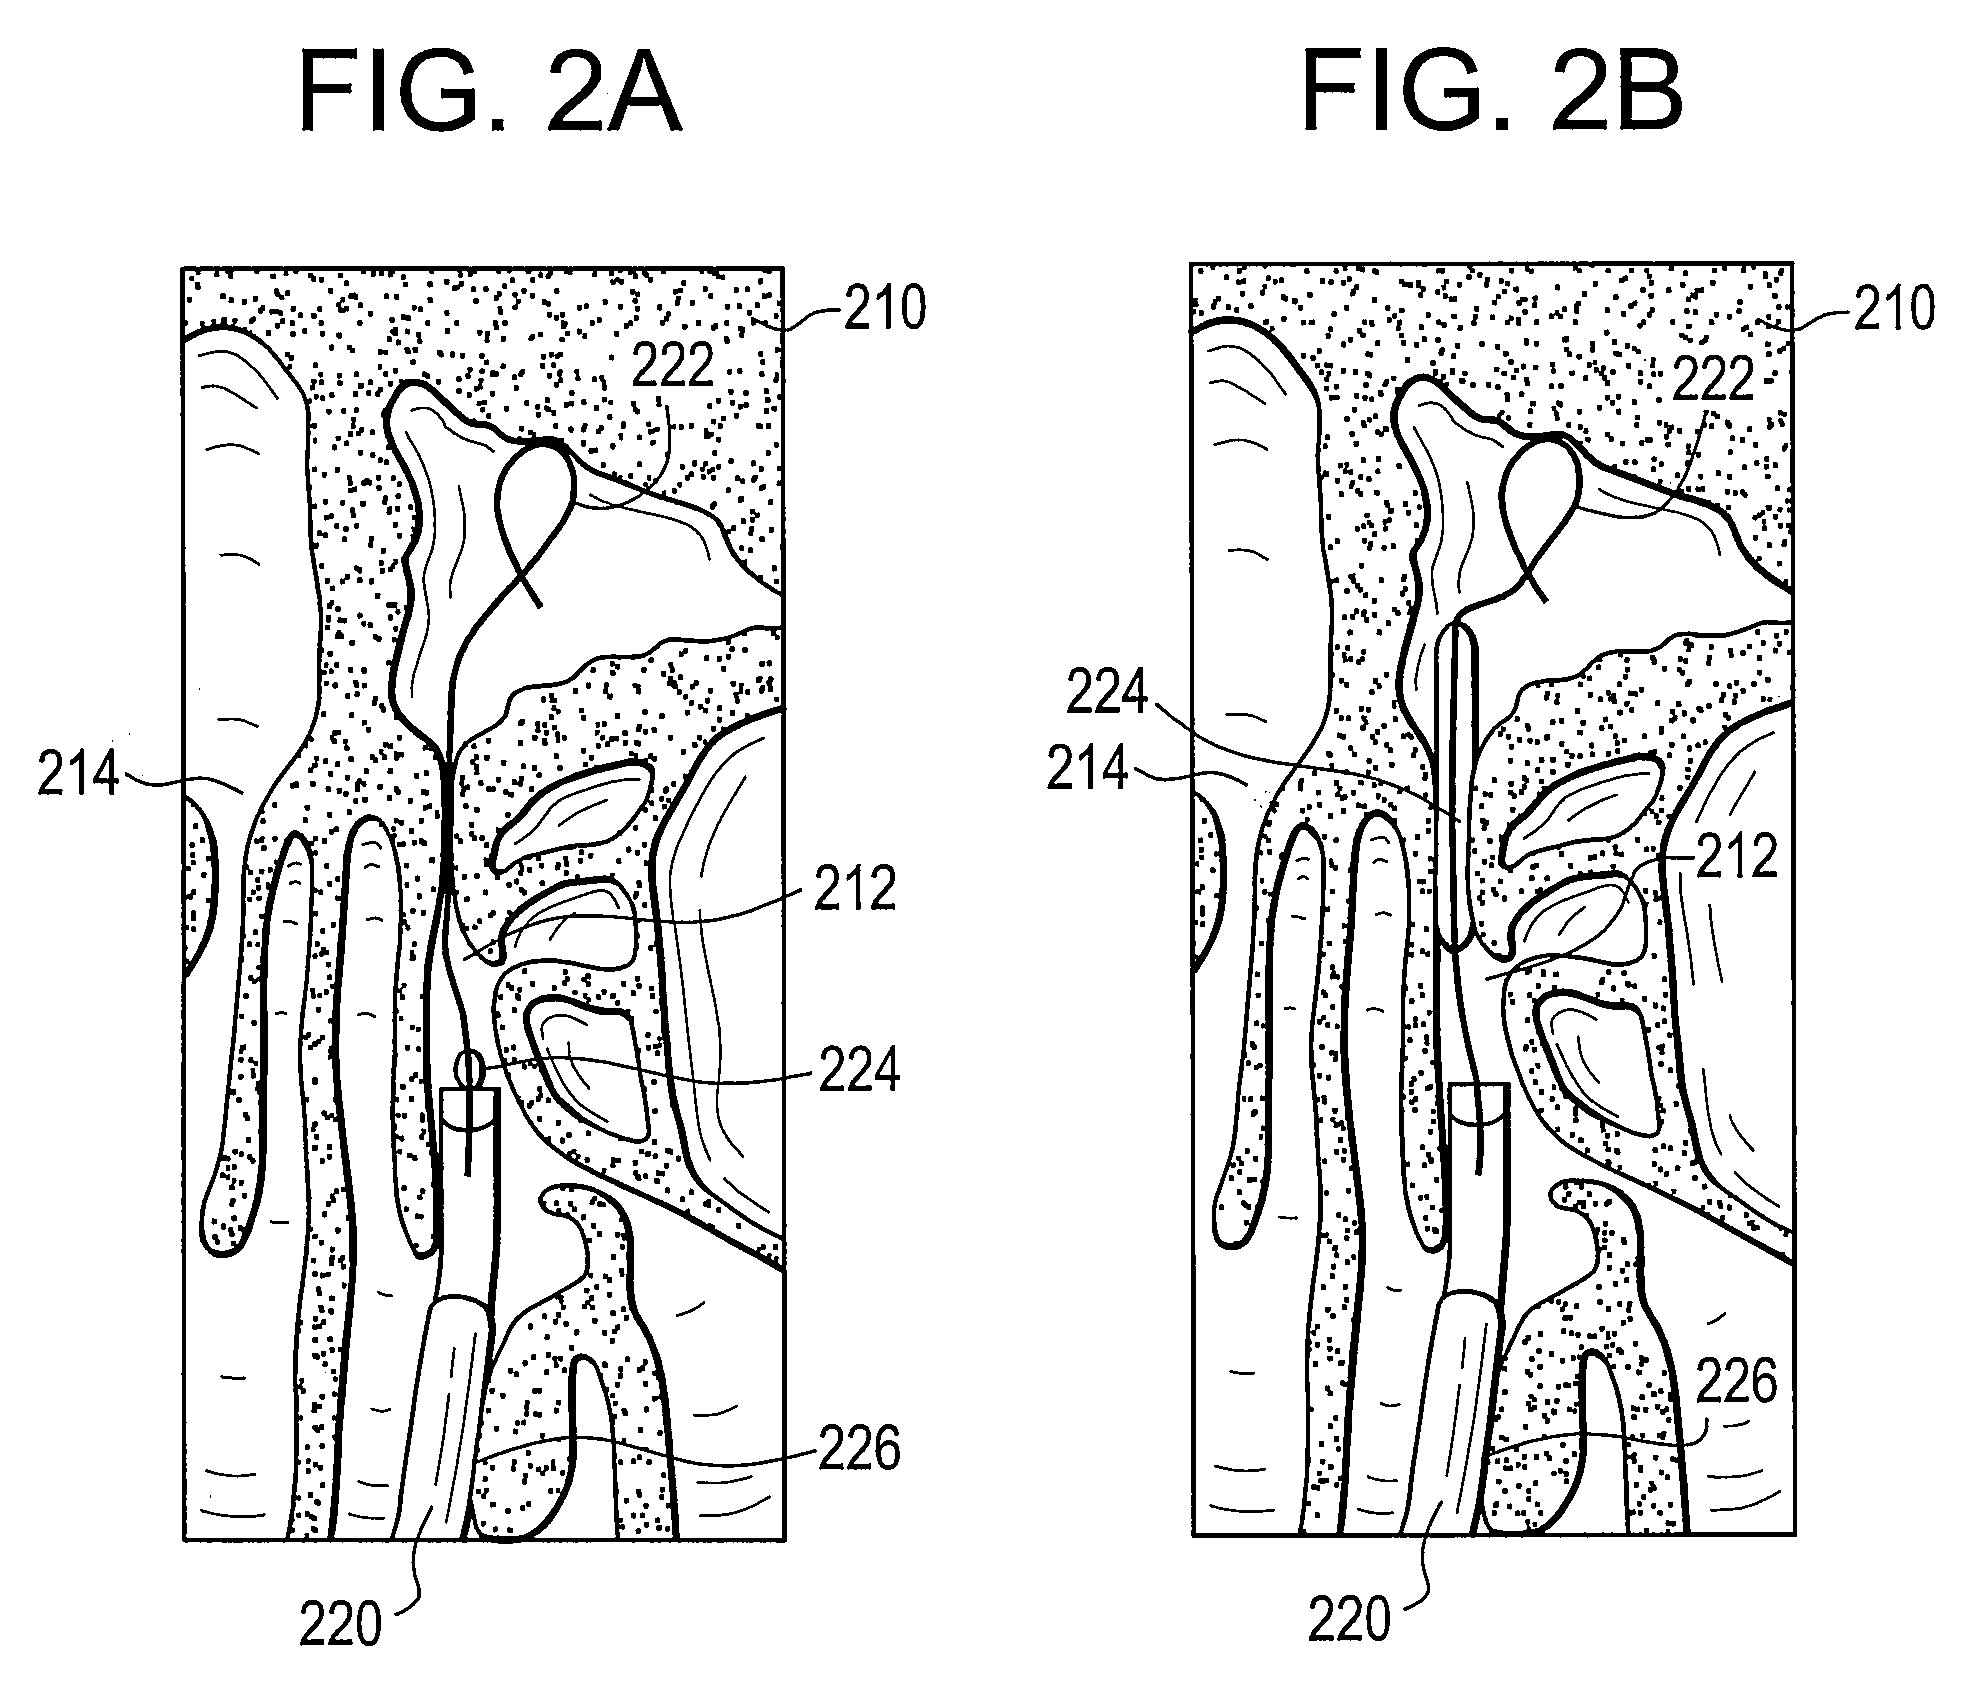 System and Method for Use of Fluoroscope and Computed Tomography Registration for Sinuplasty Navigation